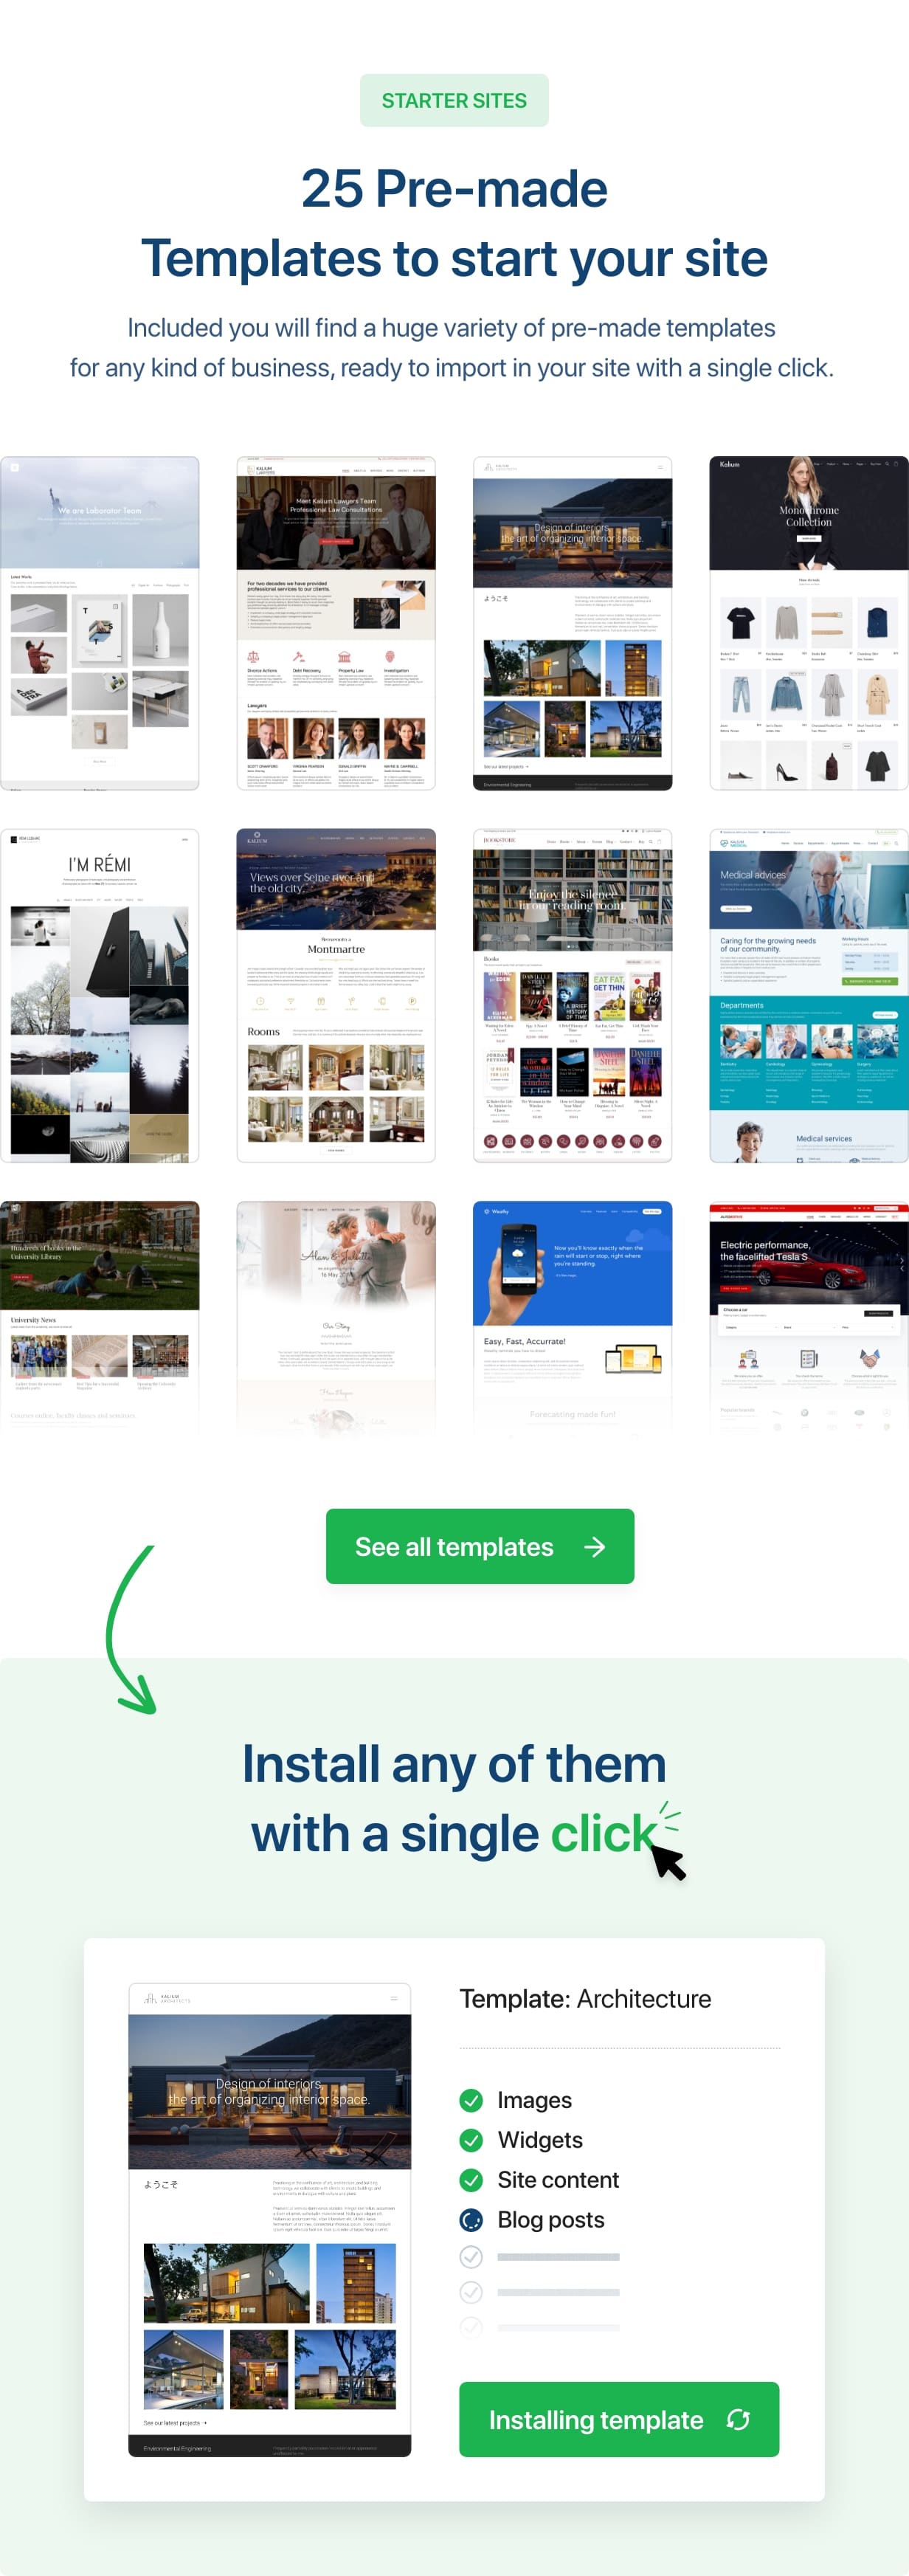 25 Pre-made Templates to start your site